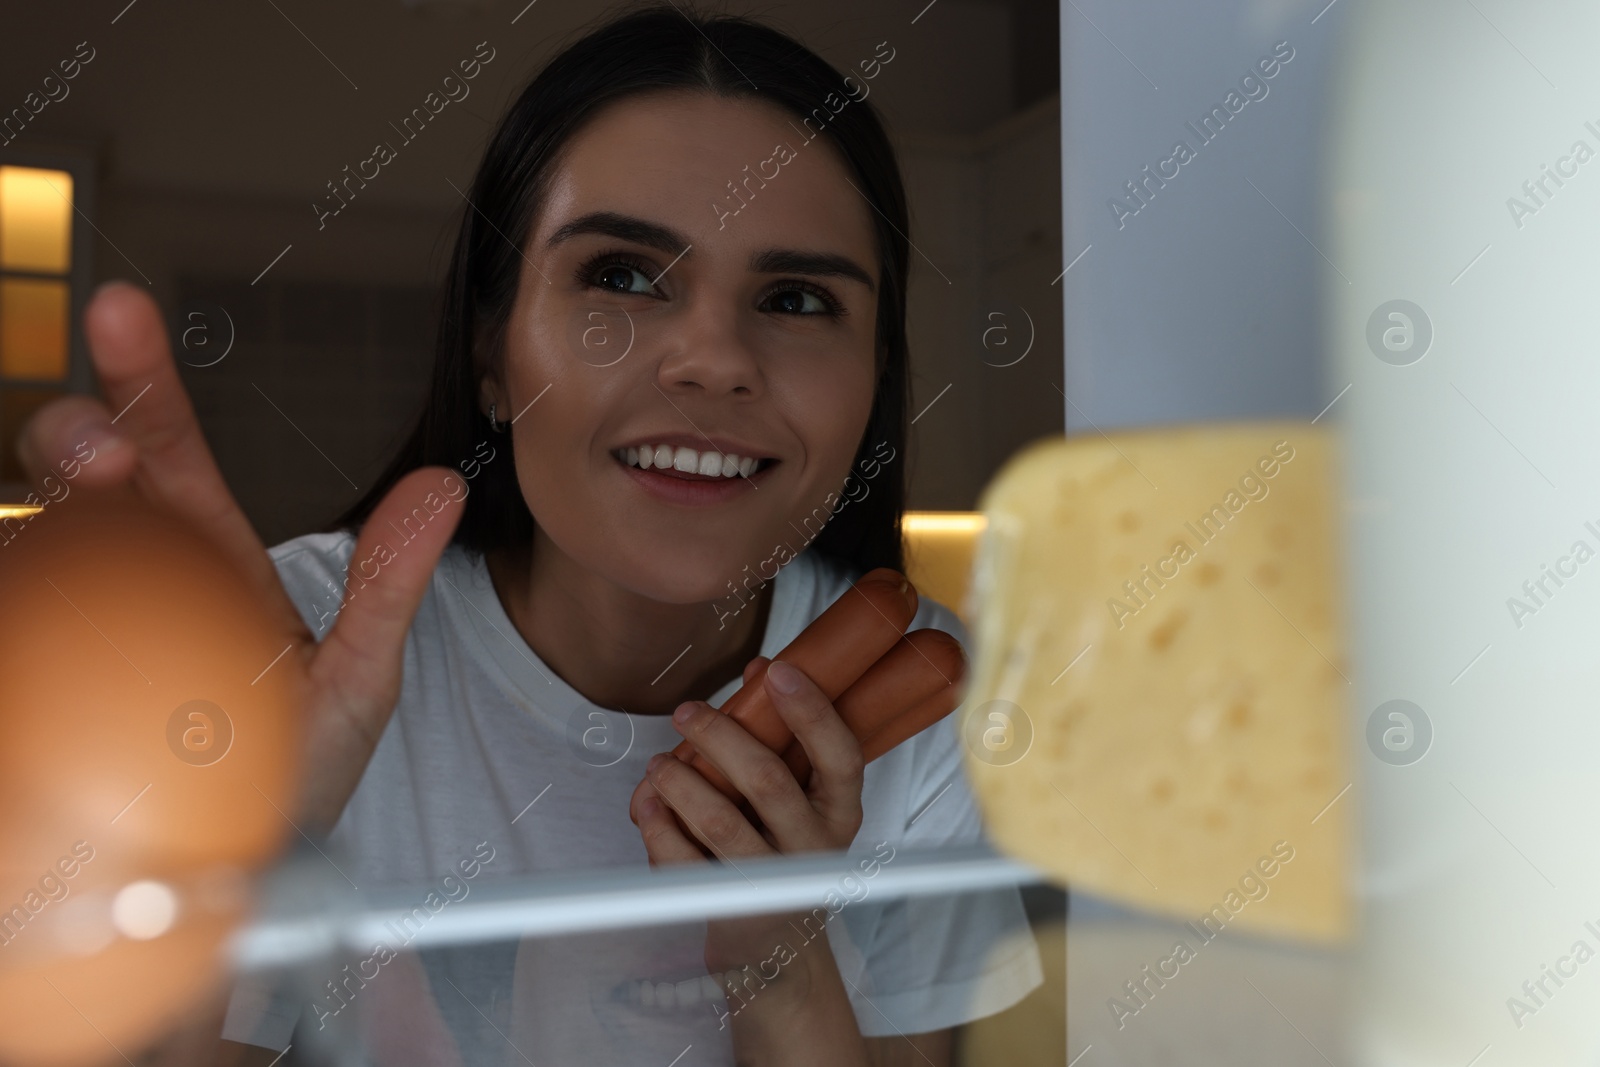 Photo of Young woman taking sausages out of refrigerator in kitchen at night, view from inside